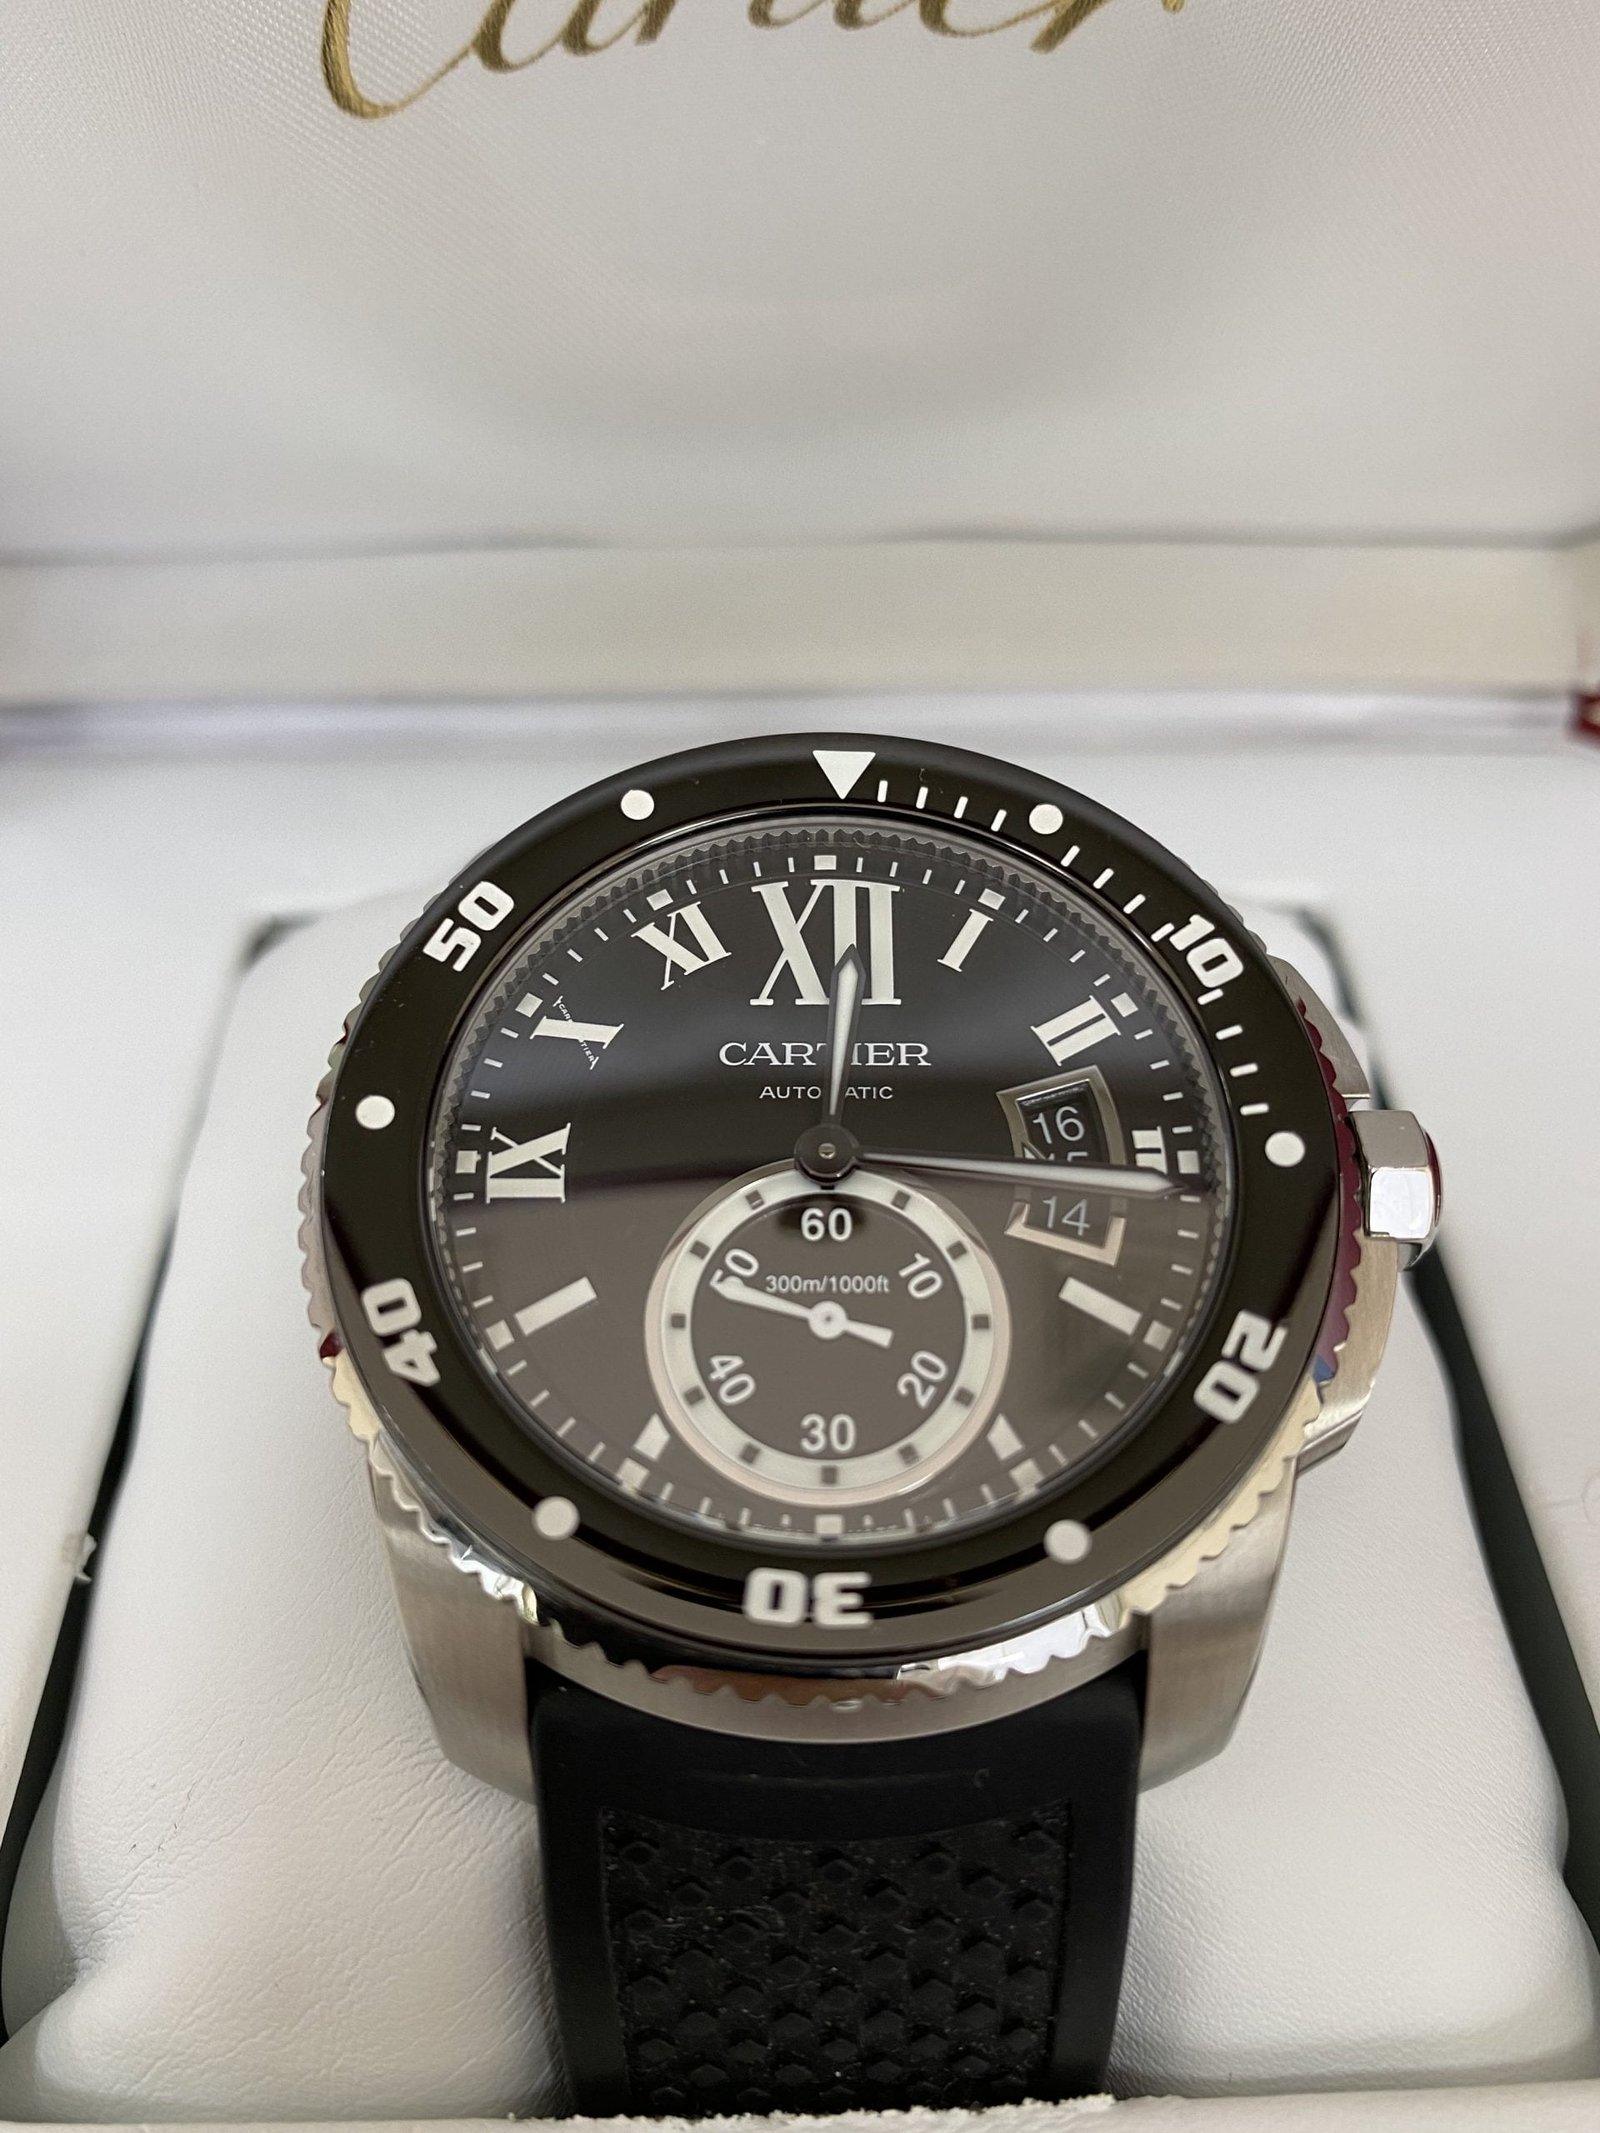 Cartier Calibre de Cartier Diver | Buy and Sell Luxury Watches | Strap Up